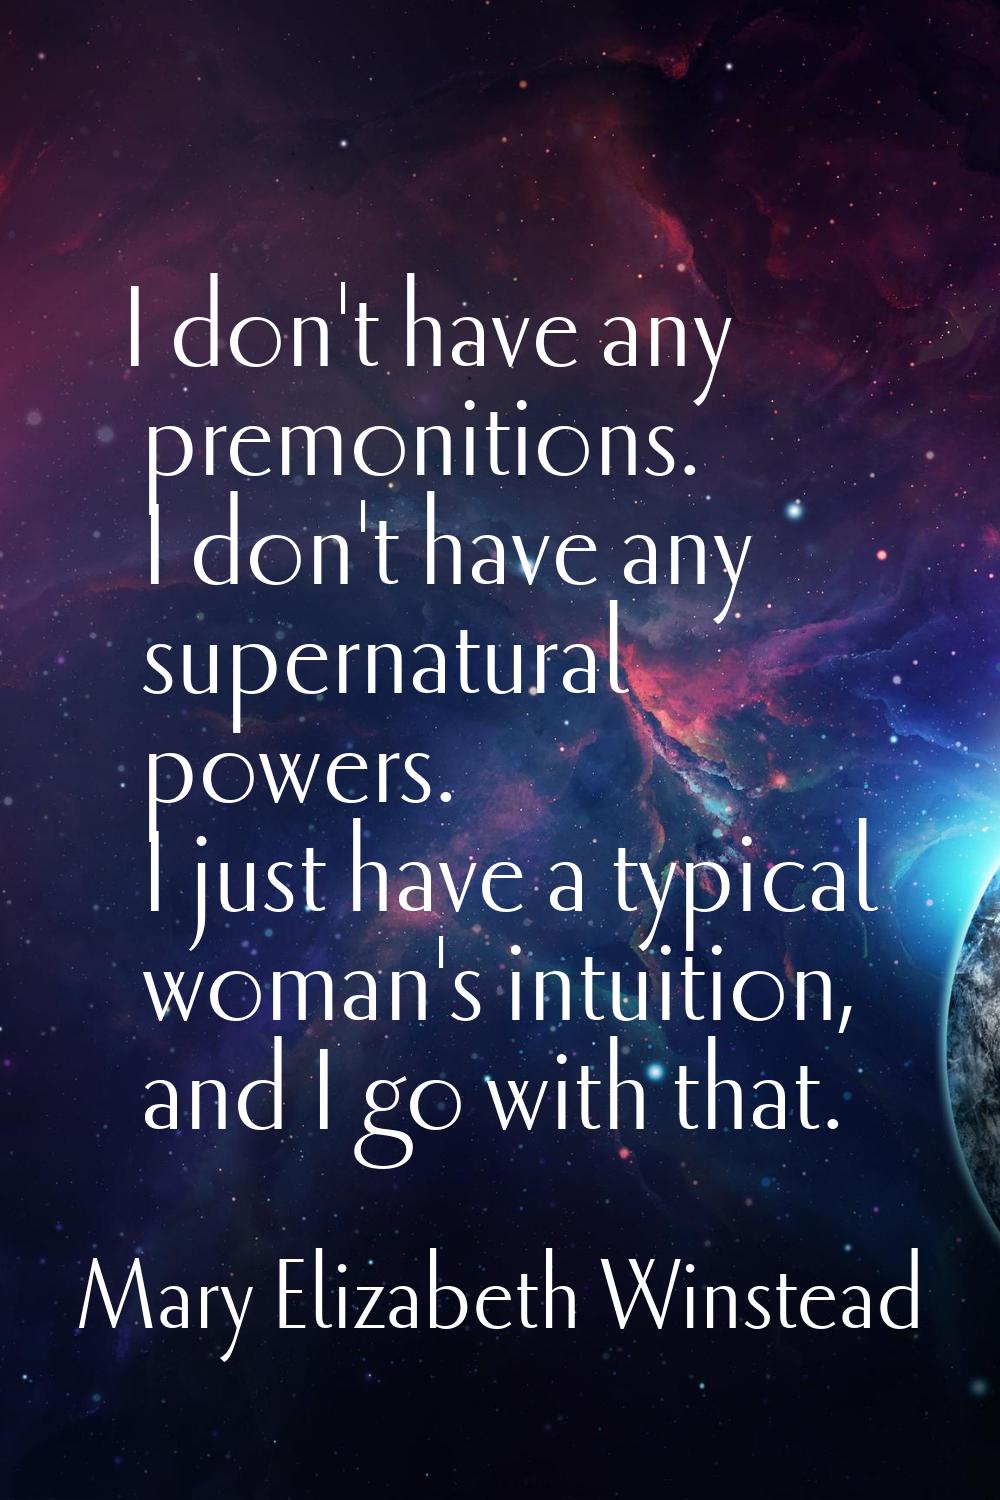 I don't have any premonitions. I don't have any supernatural powers. I just have a typical woman's 